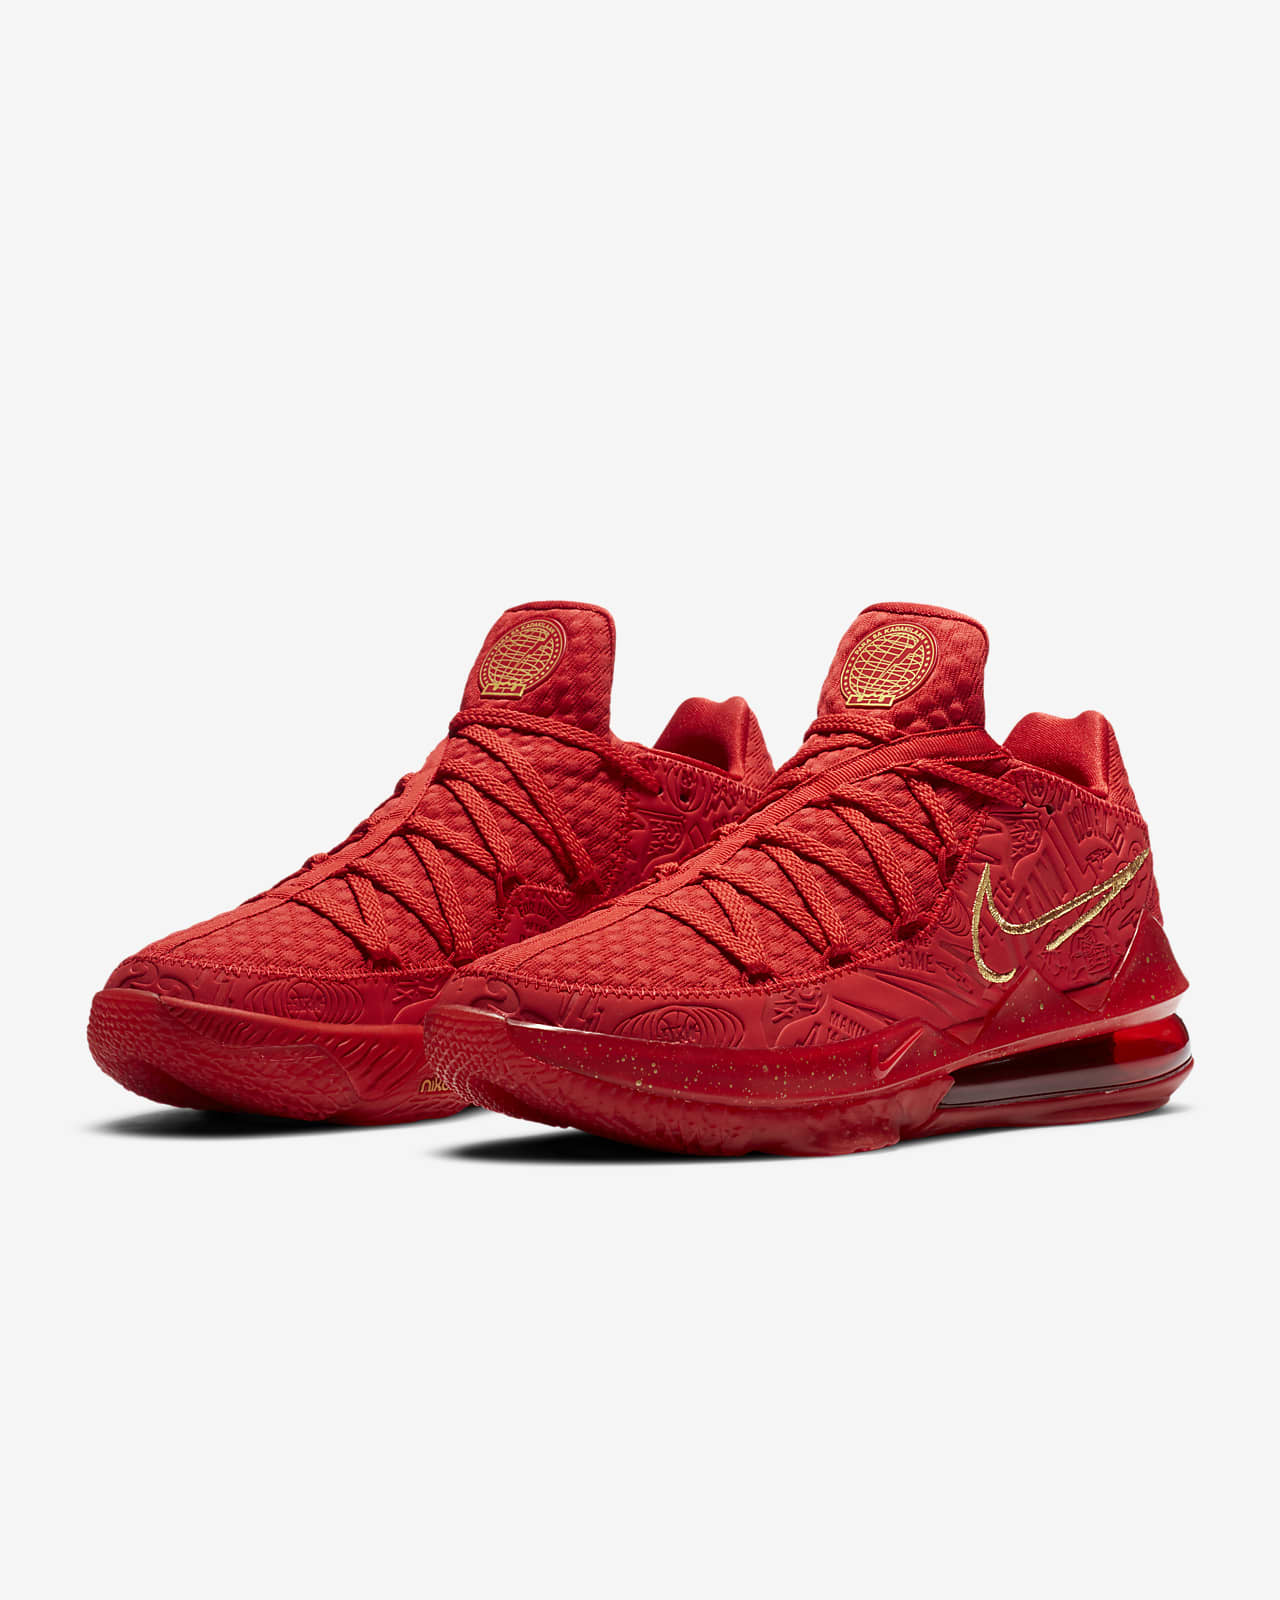 lebron 18 red low